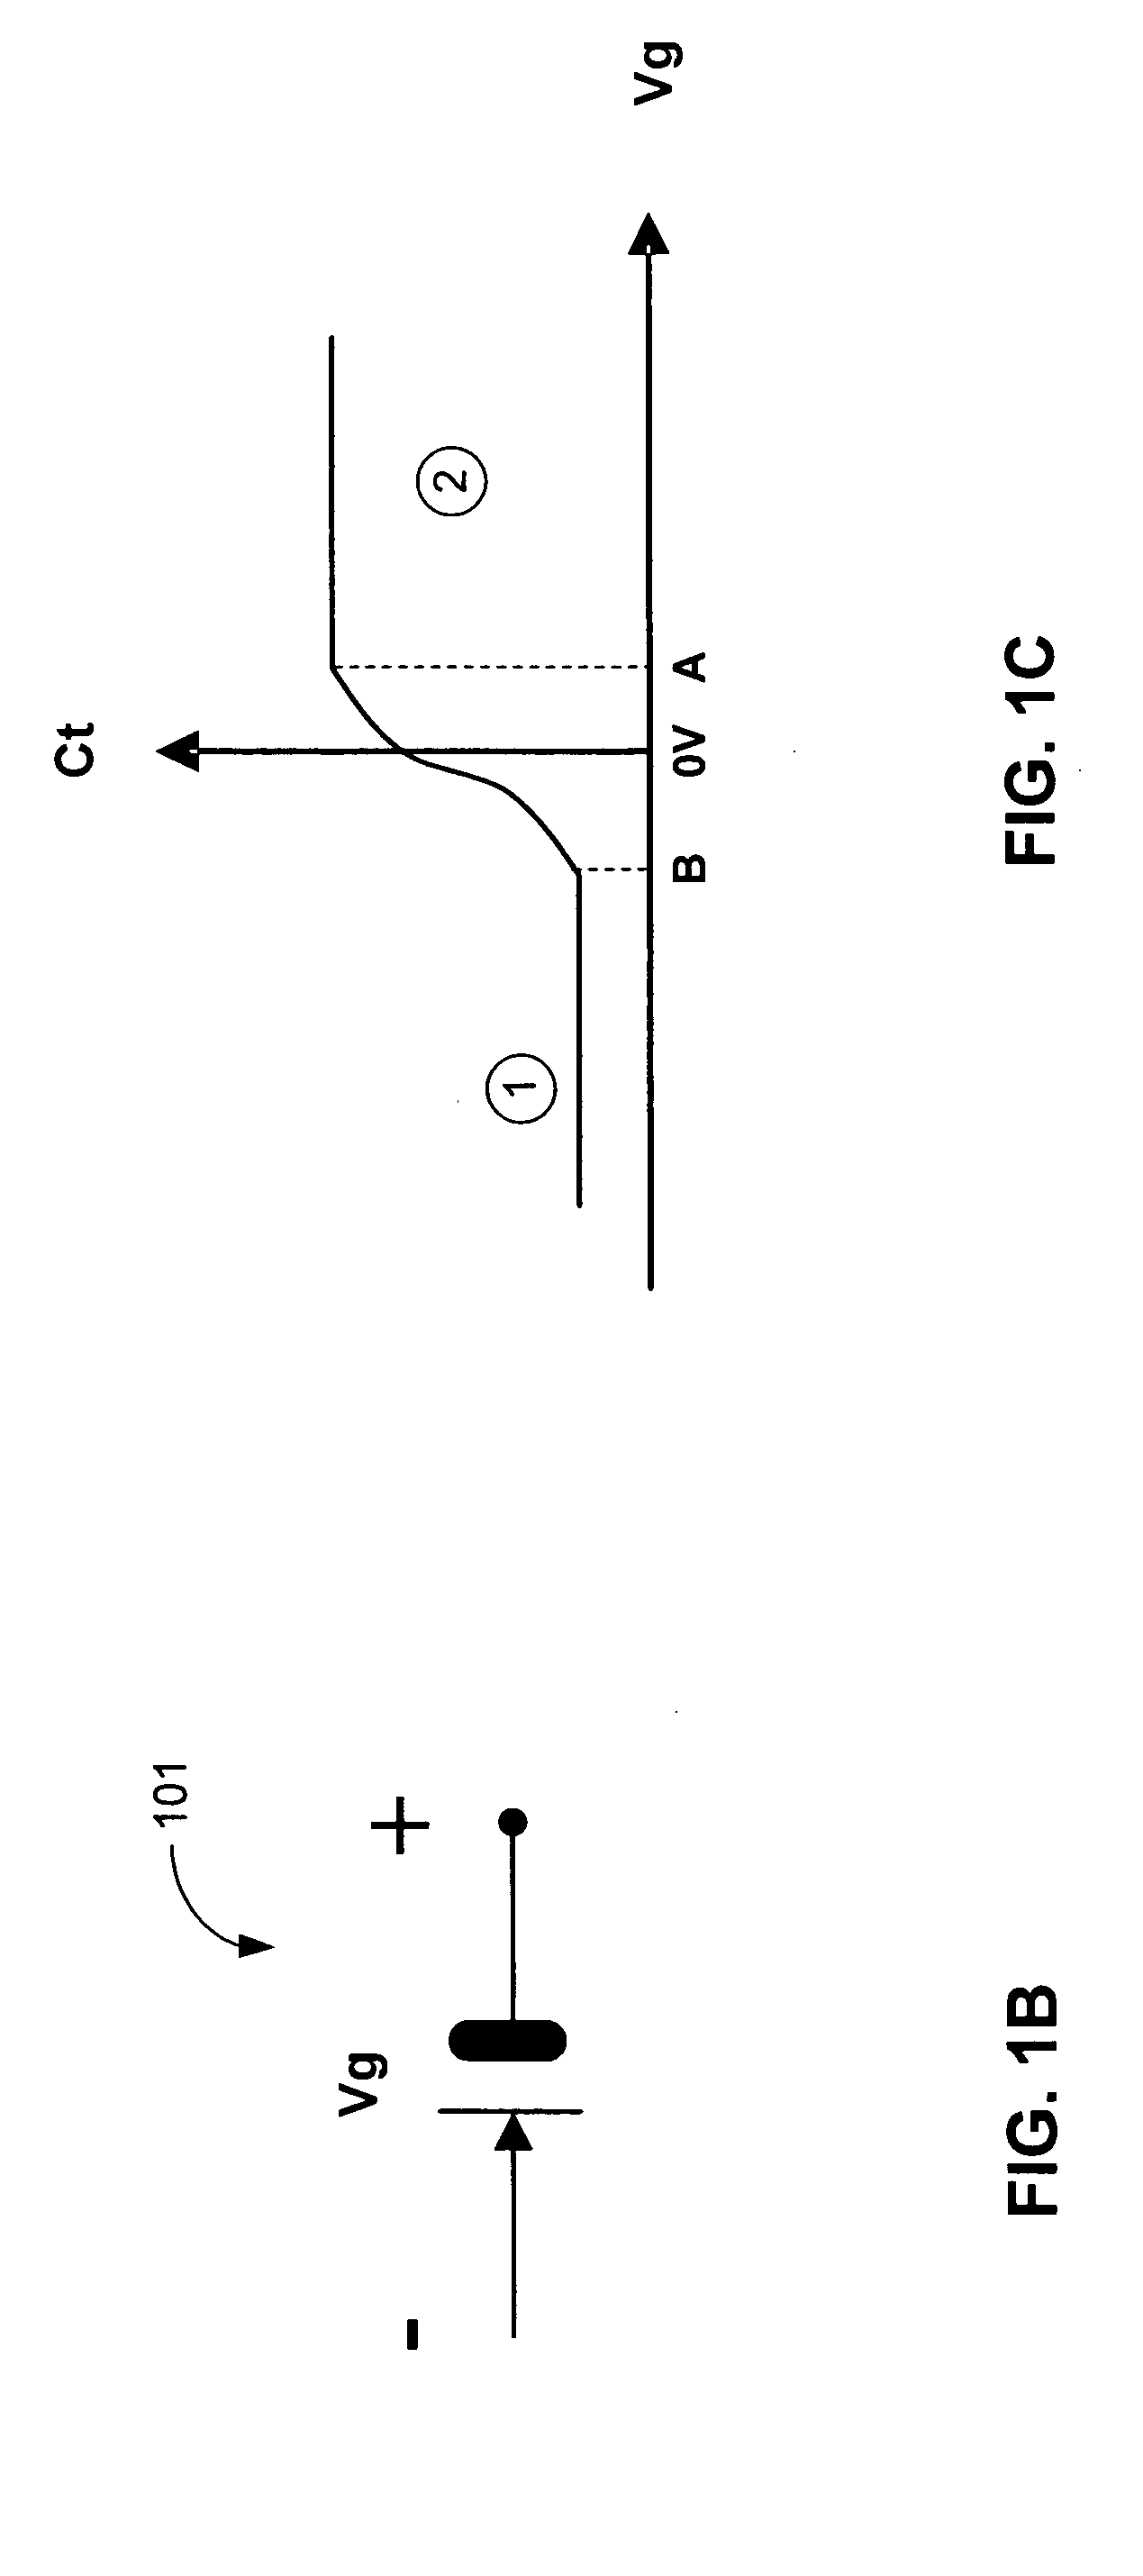 Bias-independent capacitor based on superposition of nonlinear capacitors for analog/RF circuit applications